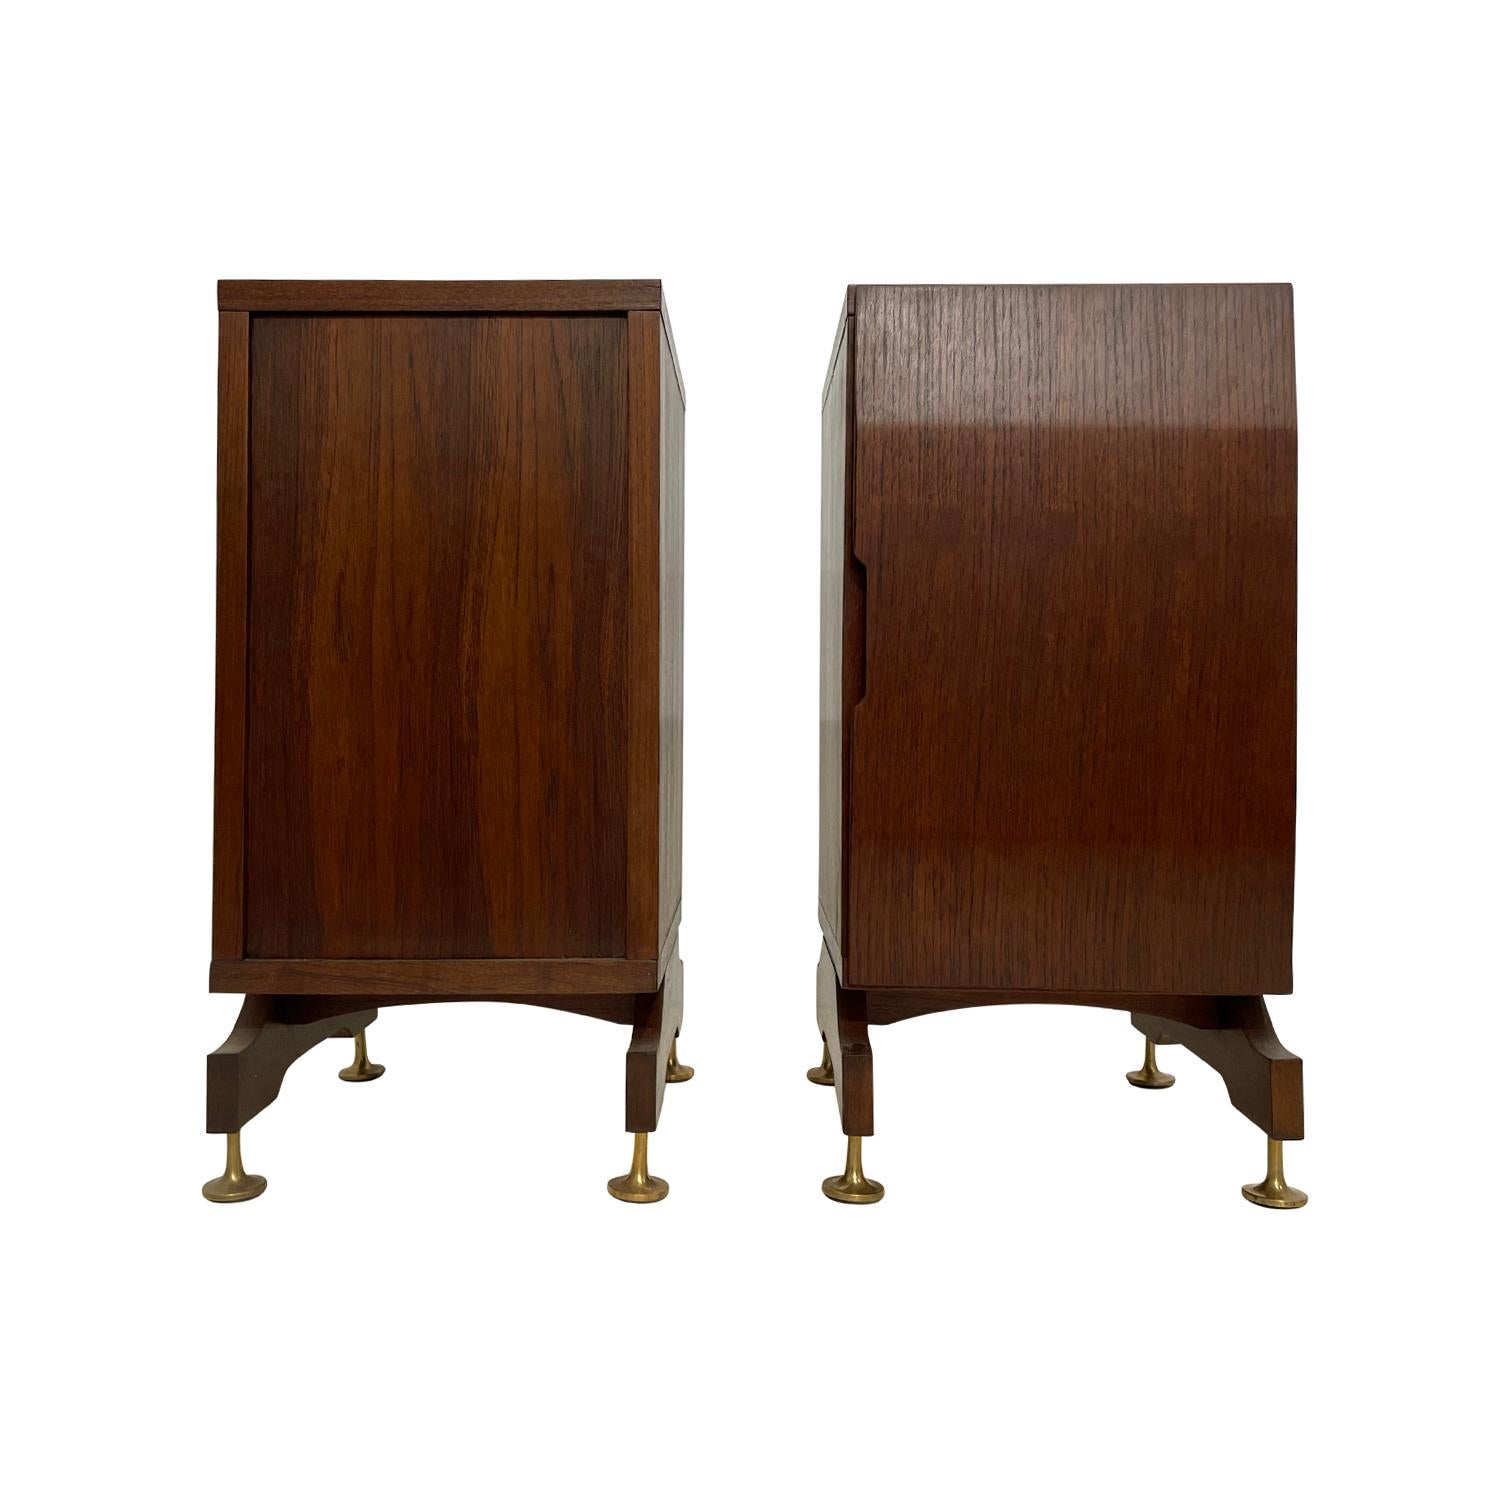 20th Century Italian Mid-Century Pair of Walnut Nightstands, Vintage Side Tables For Sale 1